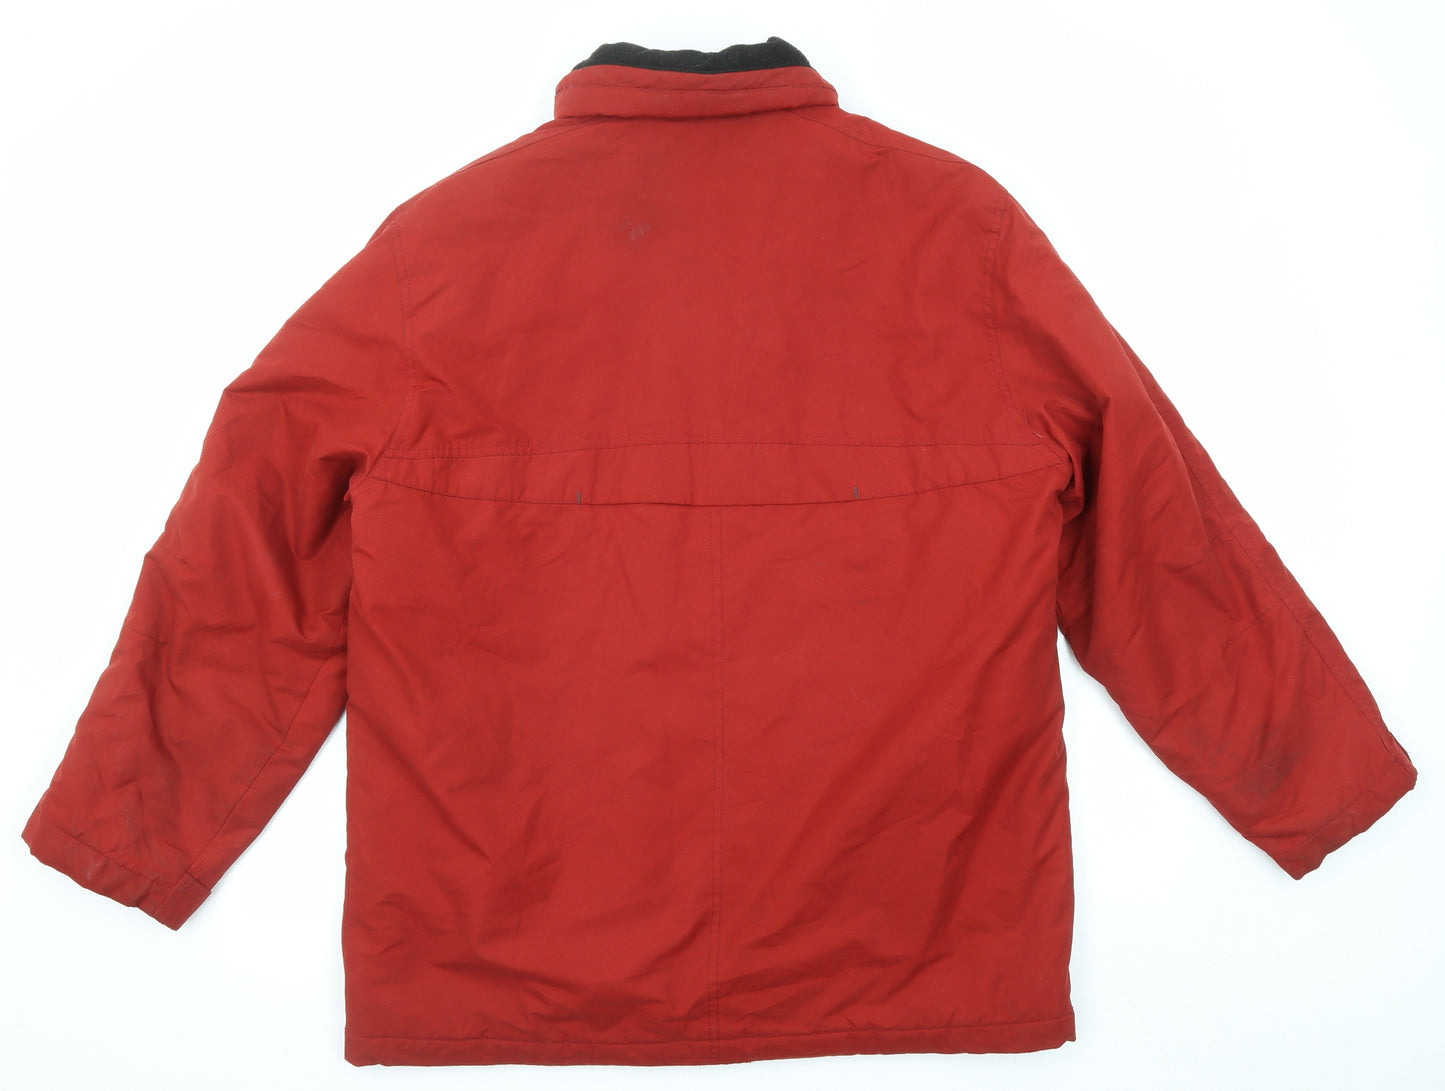 Weather Guard Mens Red Jacket Size M Zip